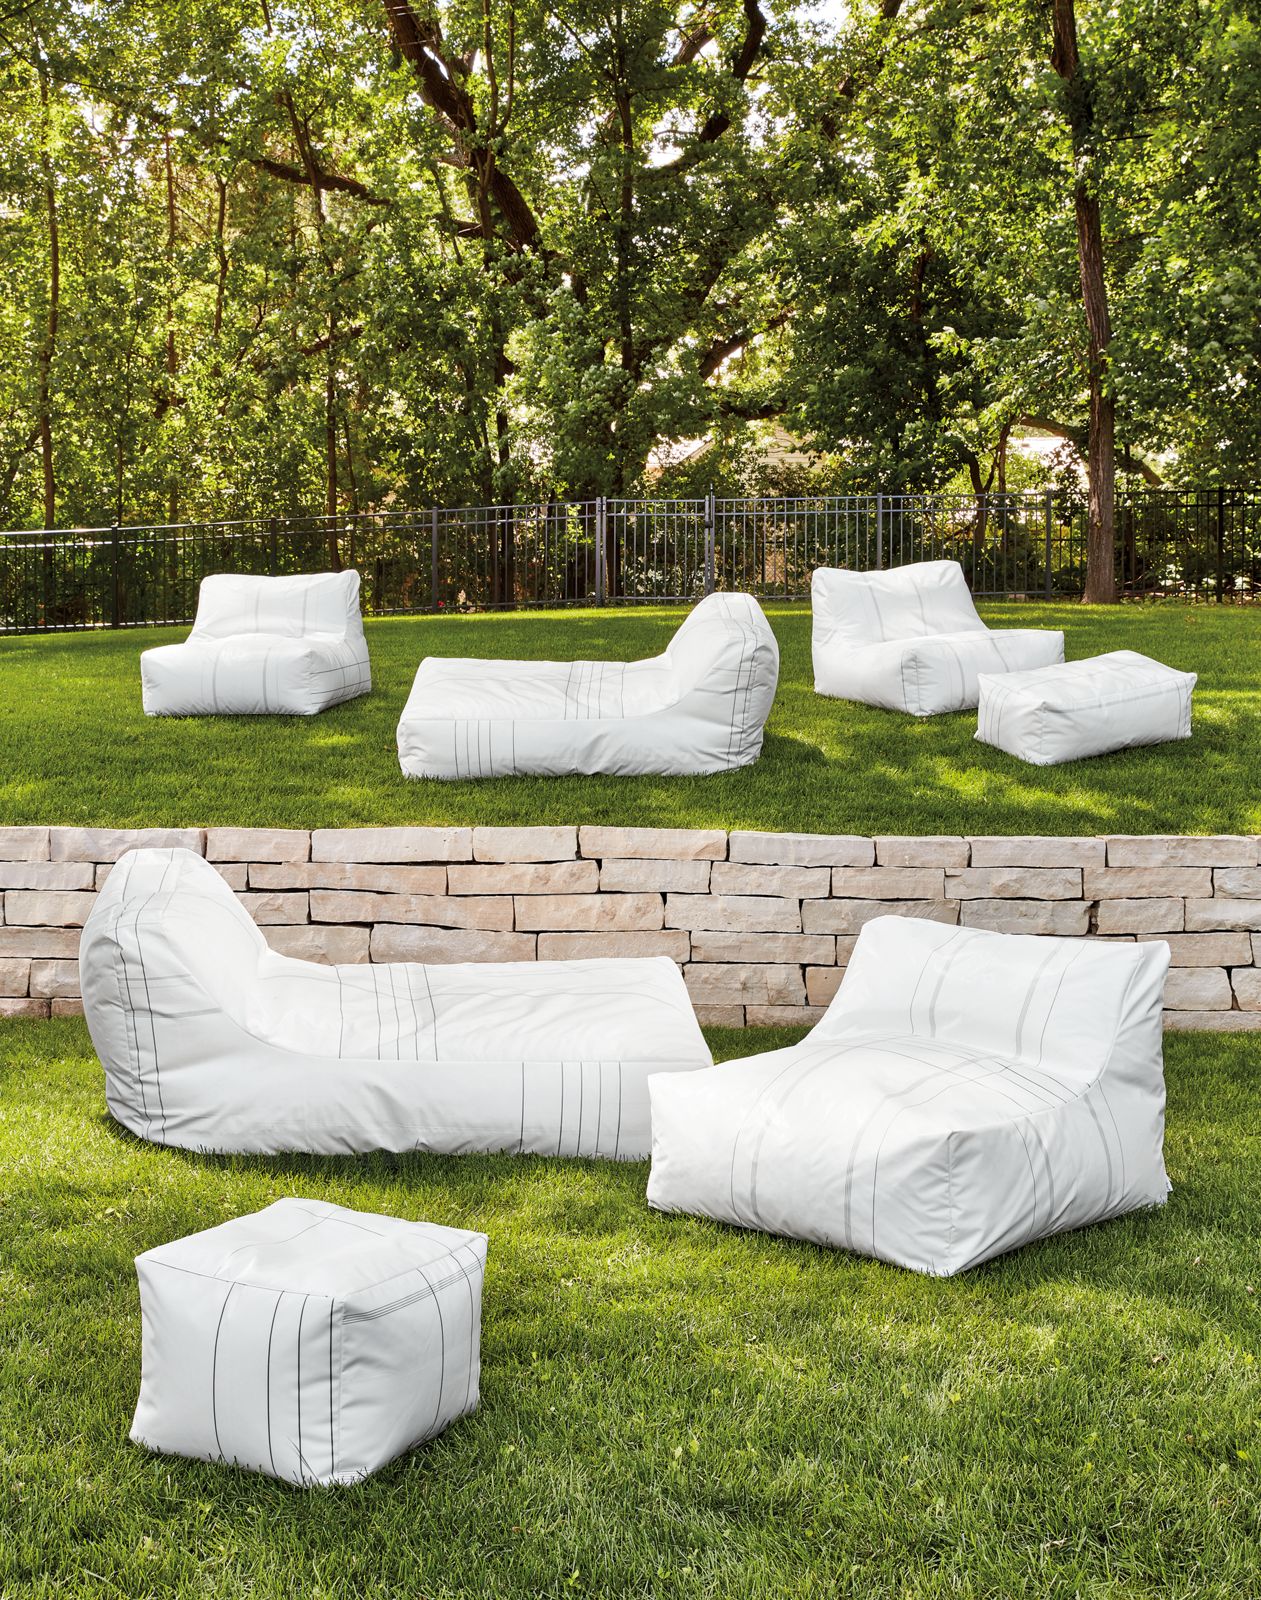 Yamba chair, poufs, ottomans, chaise and round bean bag in Upcycled Airbag material in outdoor setting.